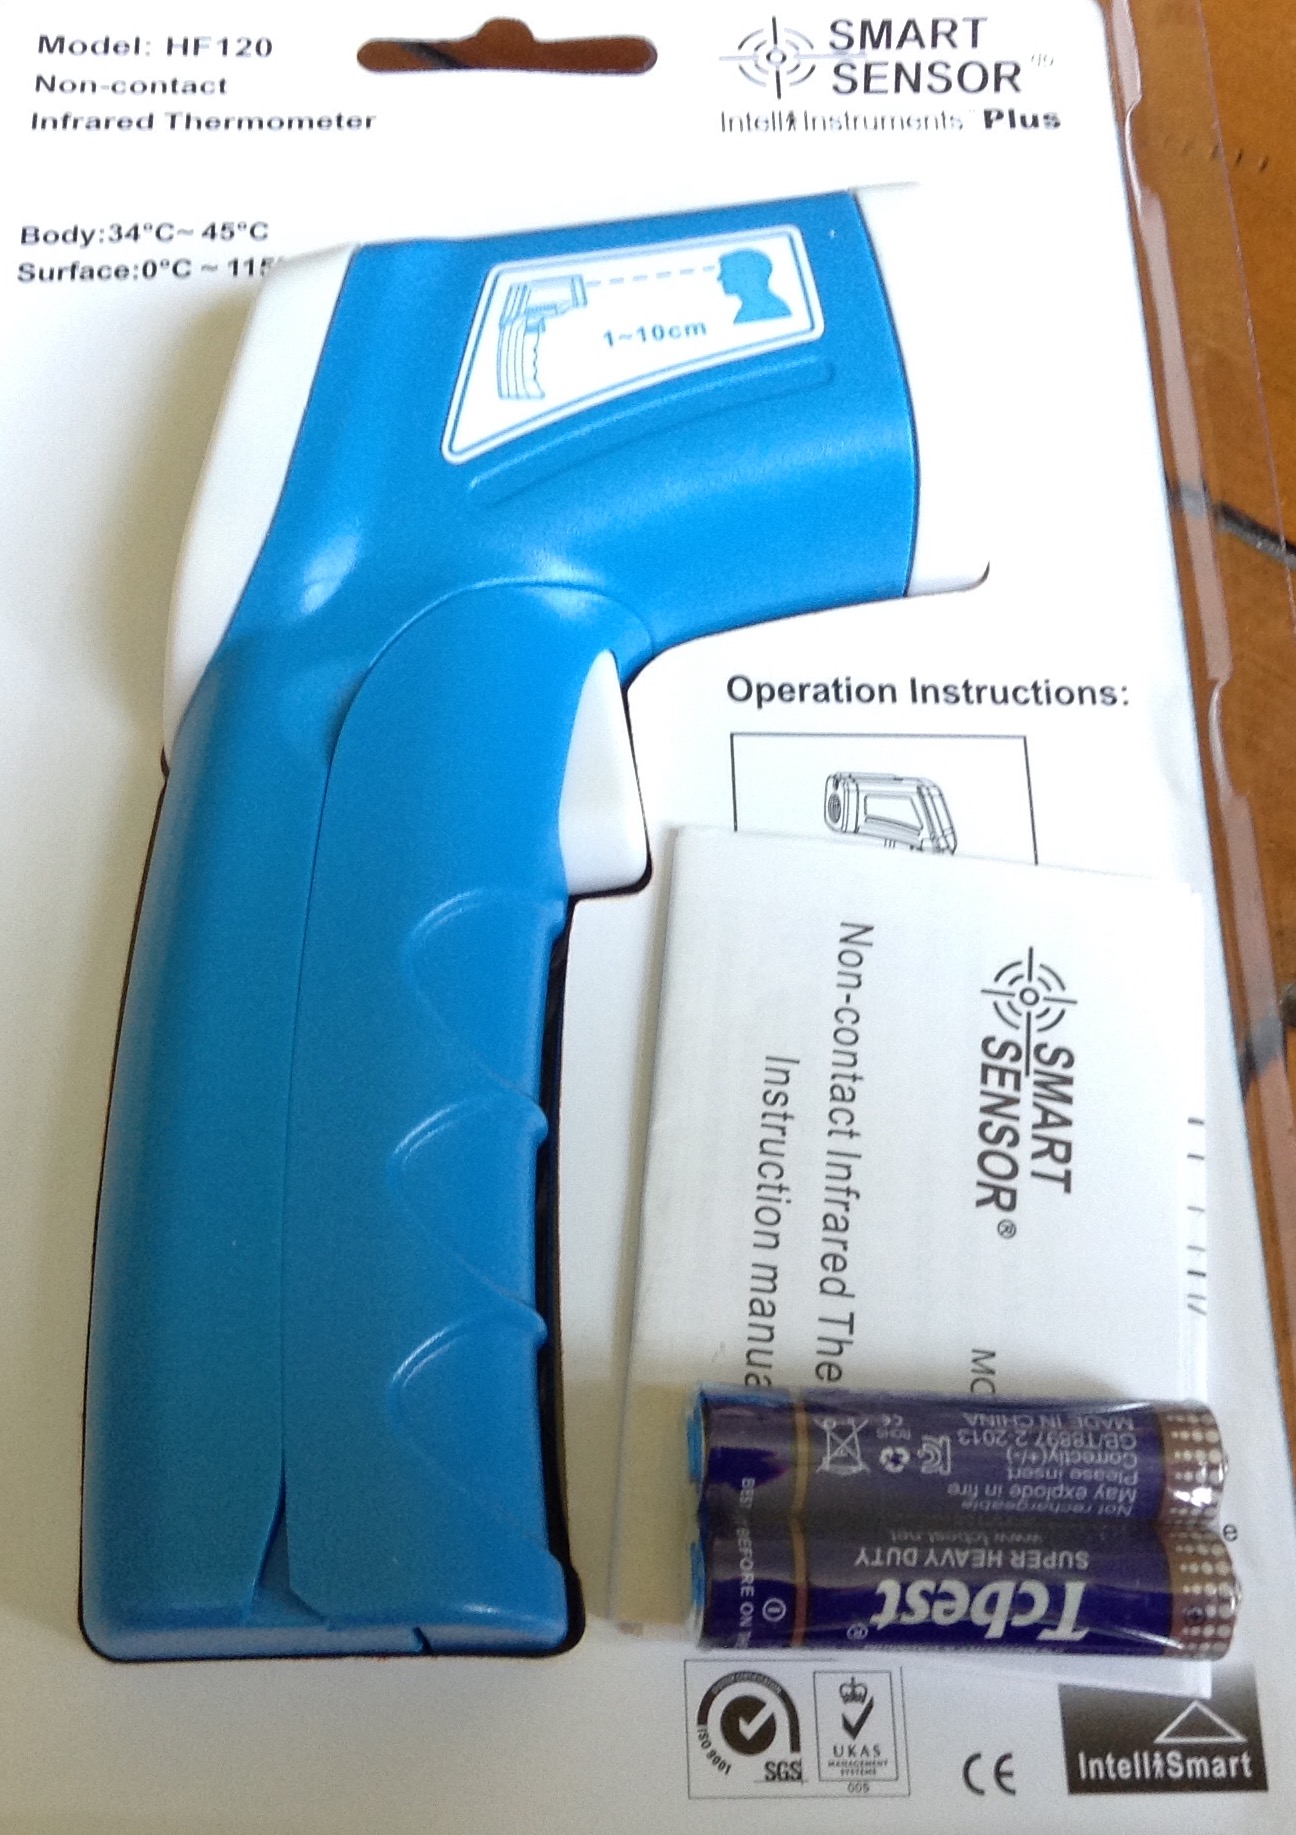 A Good Looking, Compact, Contactless Infrared Thermometer